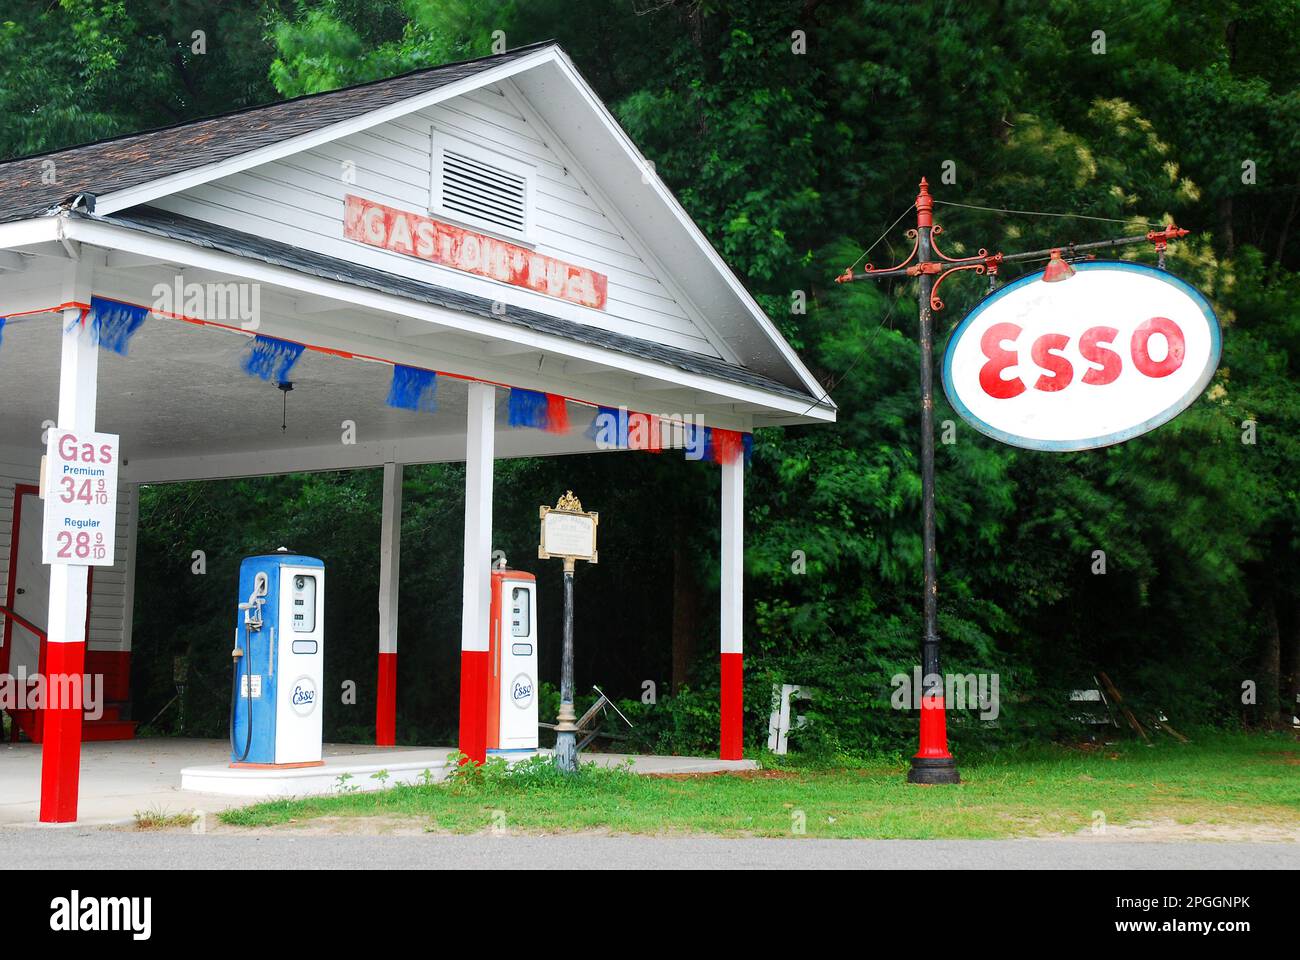 A vintage gas station, still using a historic retro Esso sign, still serves as an attraction in South Carolina Stock Photo